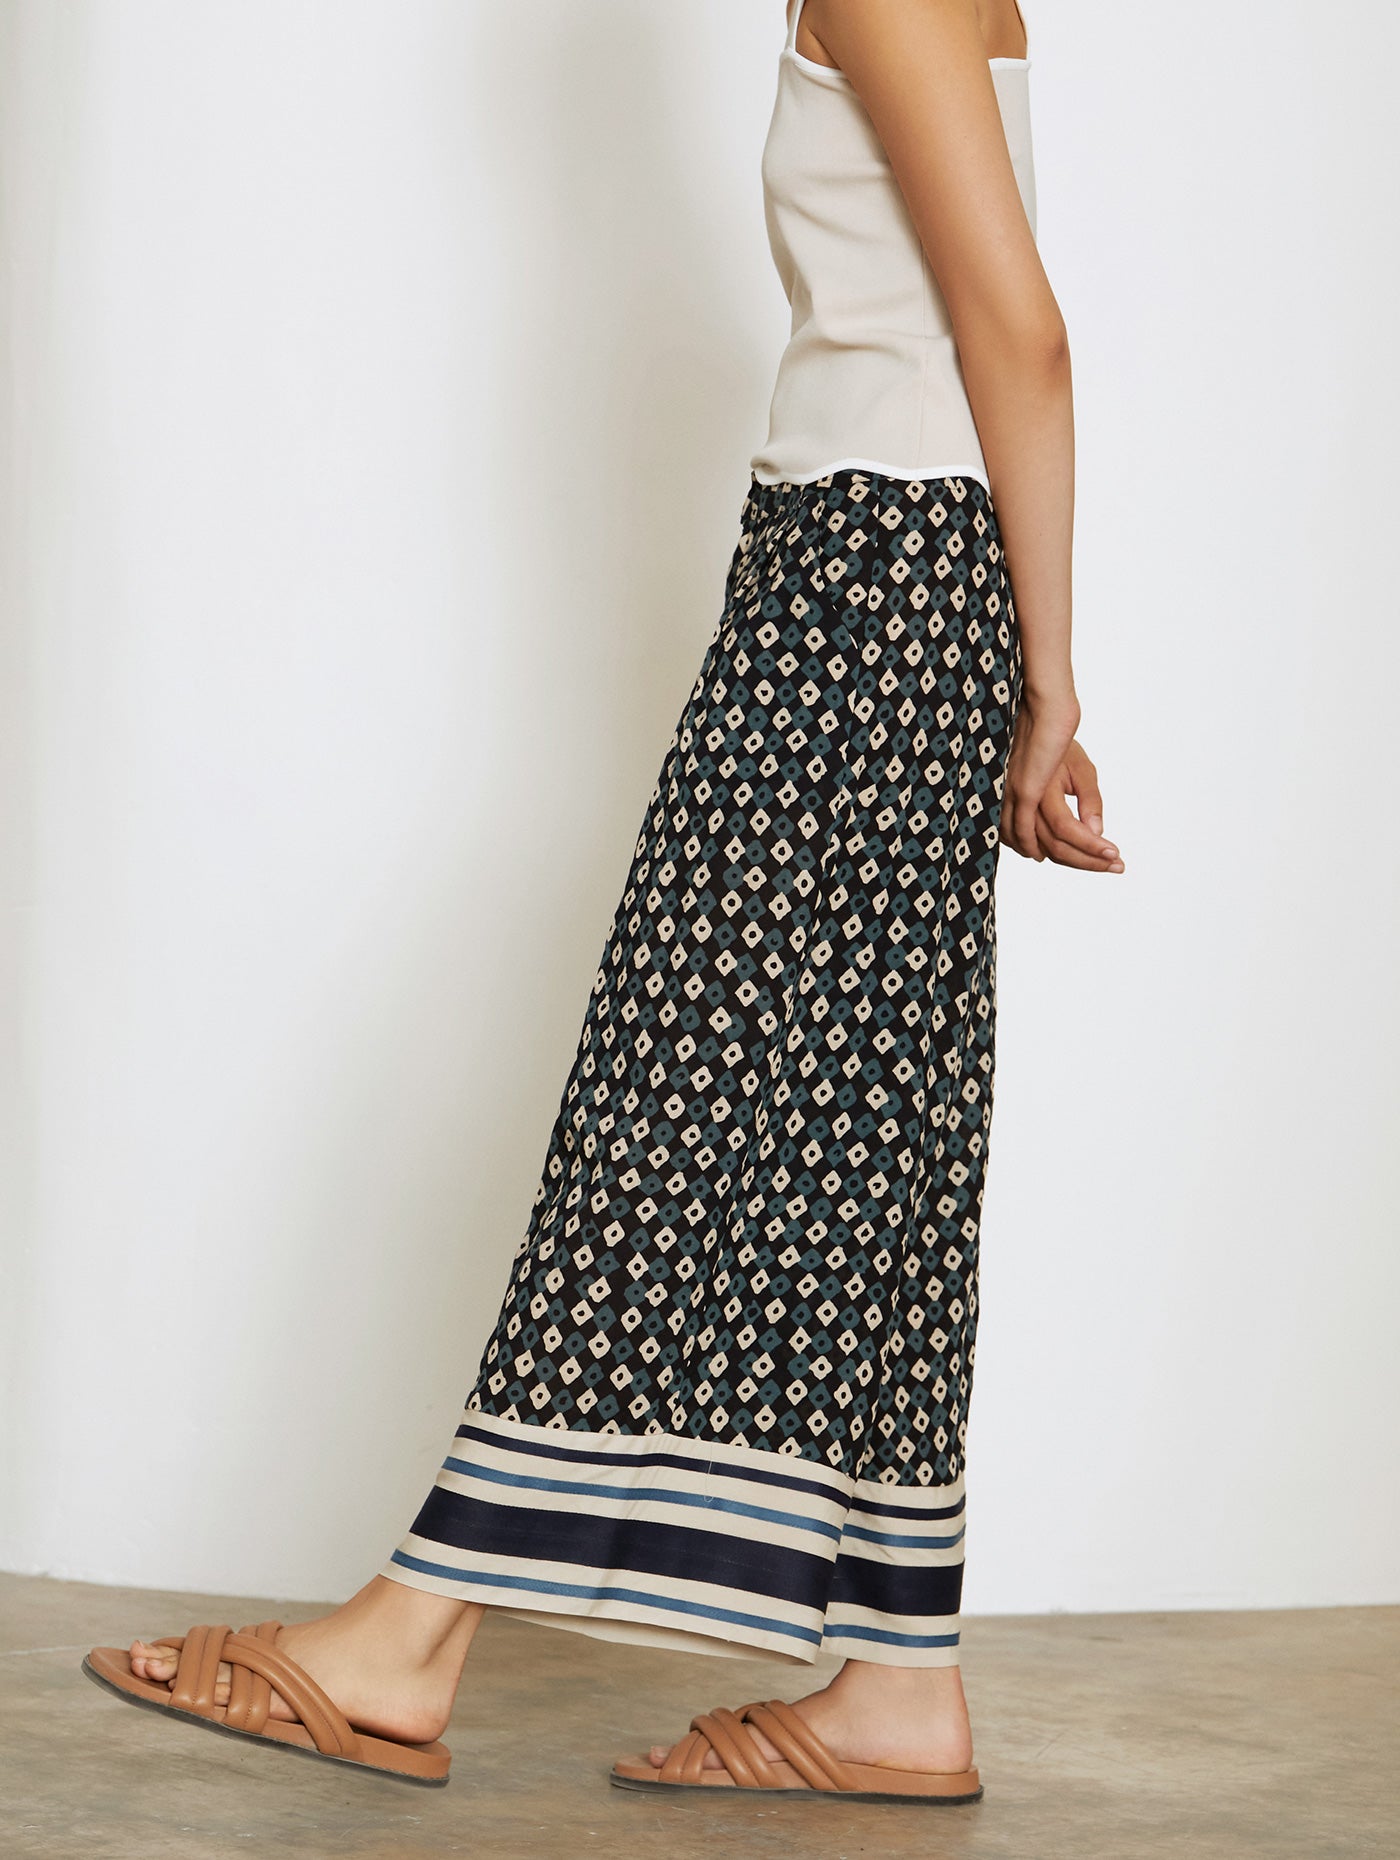 Skatie Printed Cotton Trousers in Navy